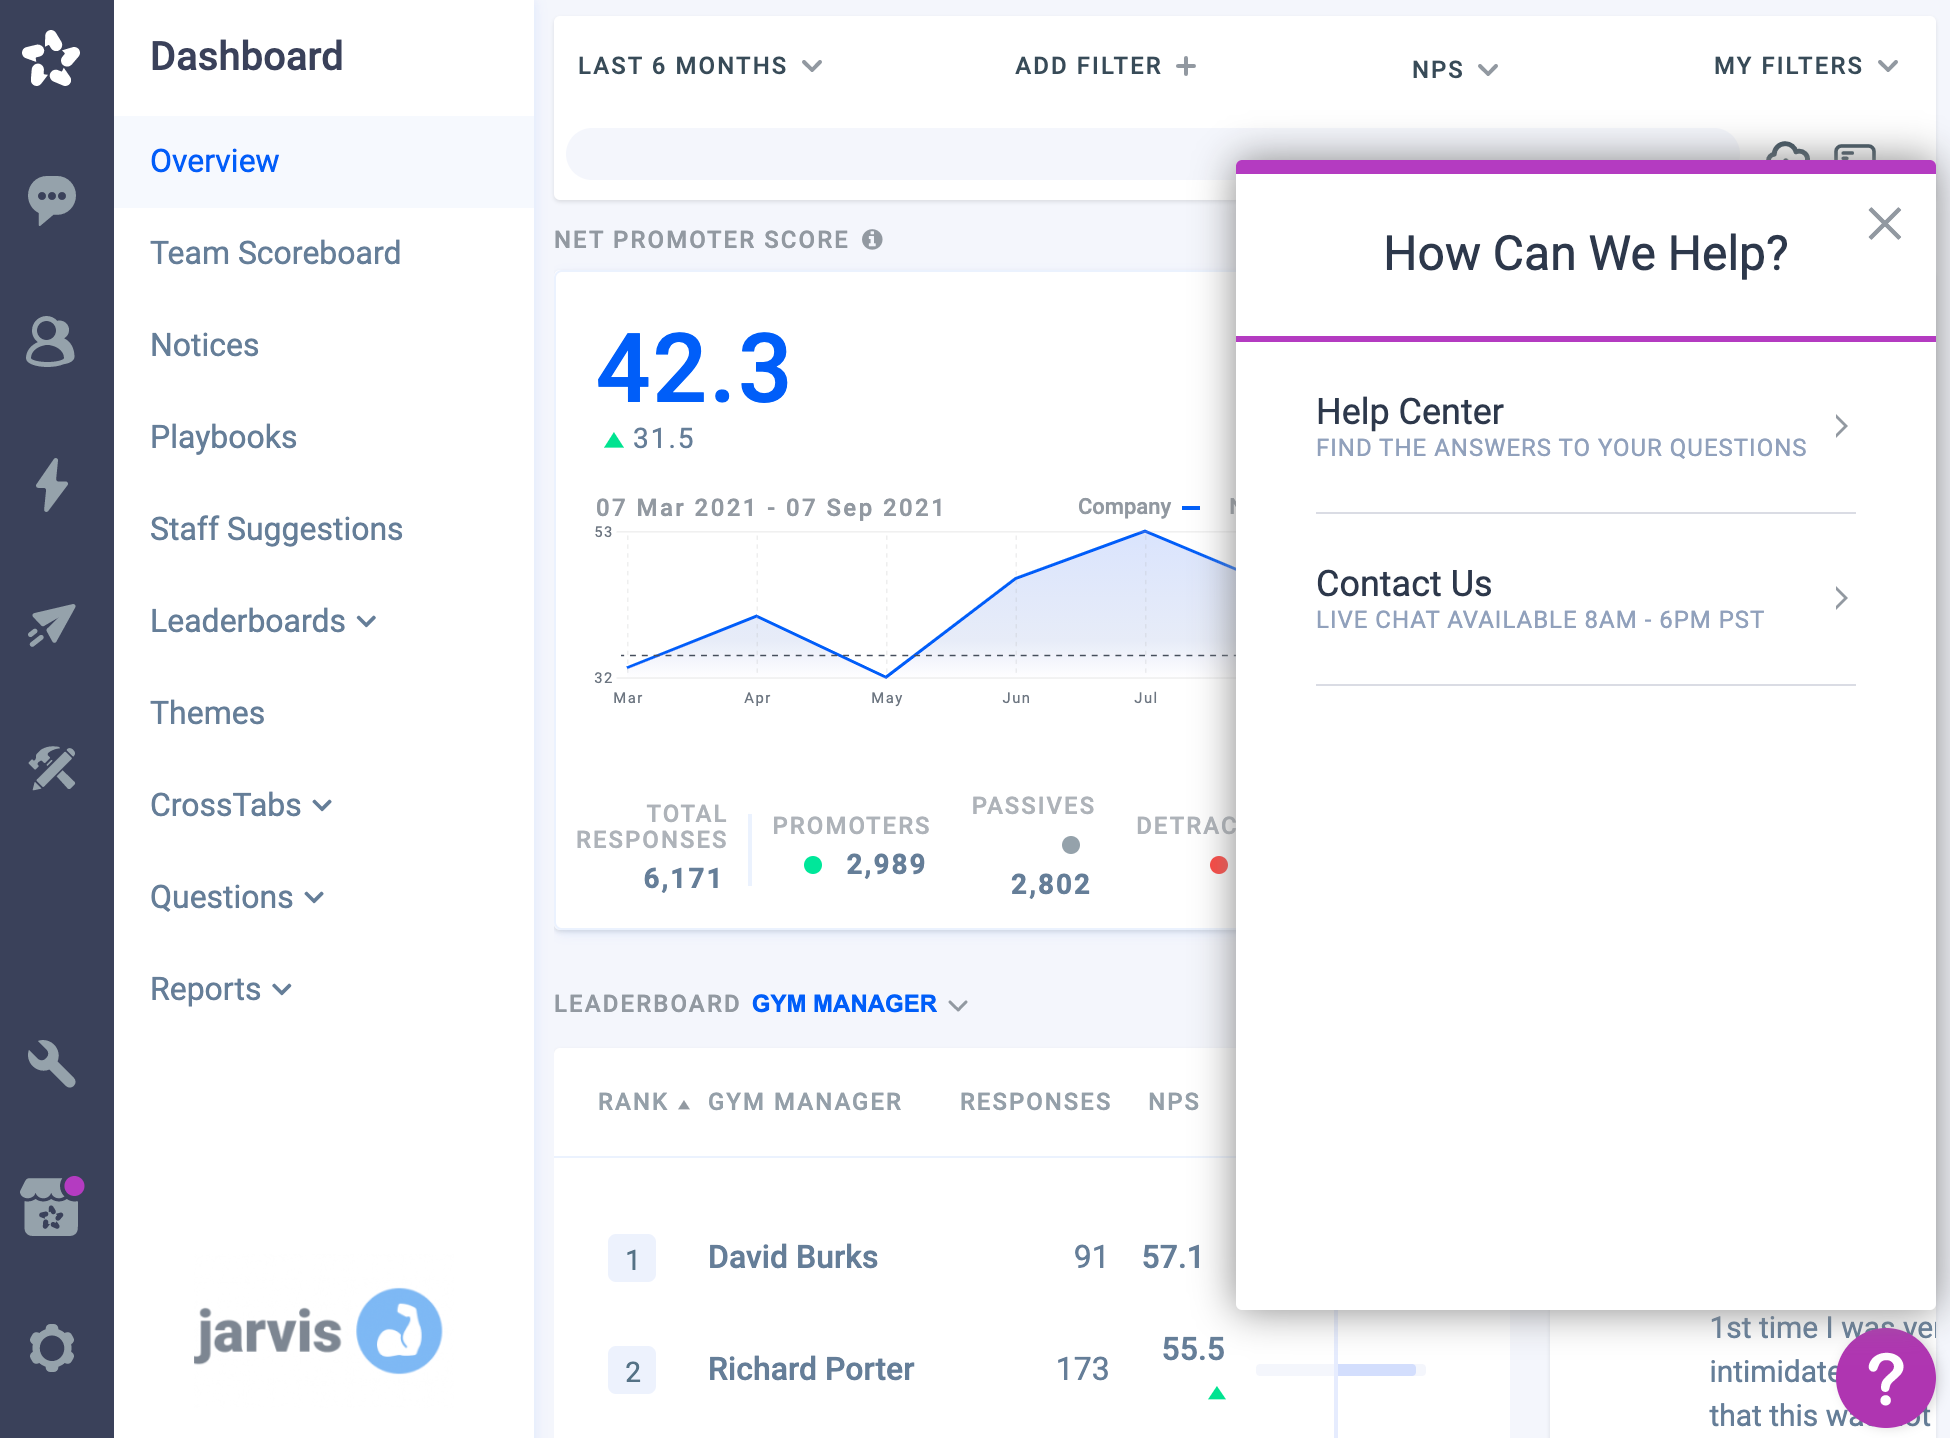 AskNicely - Dashboard 